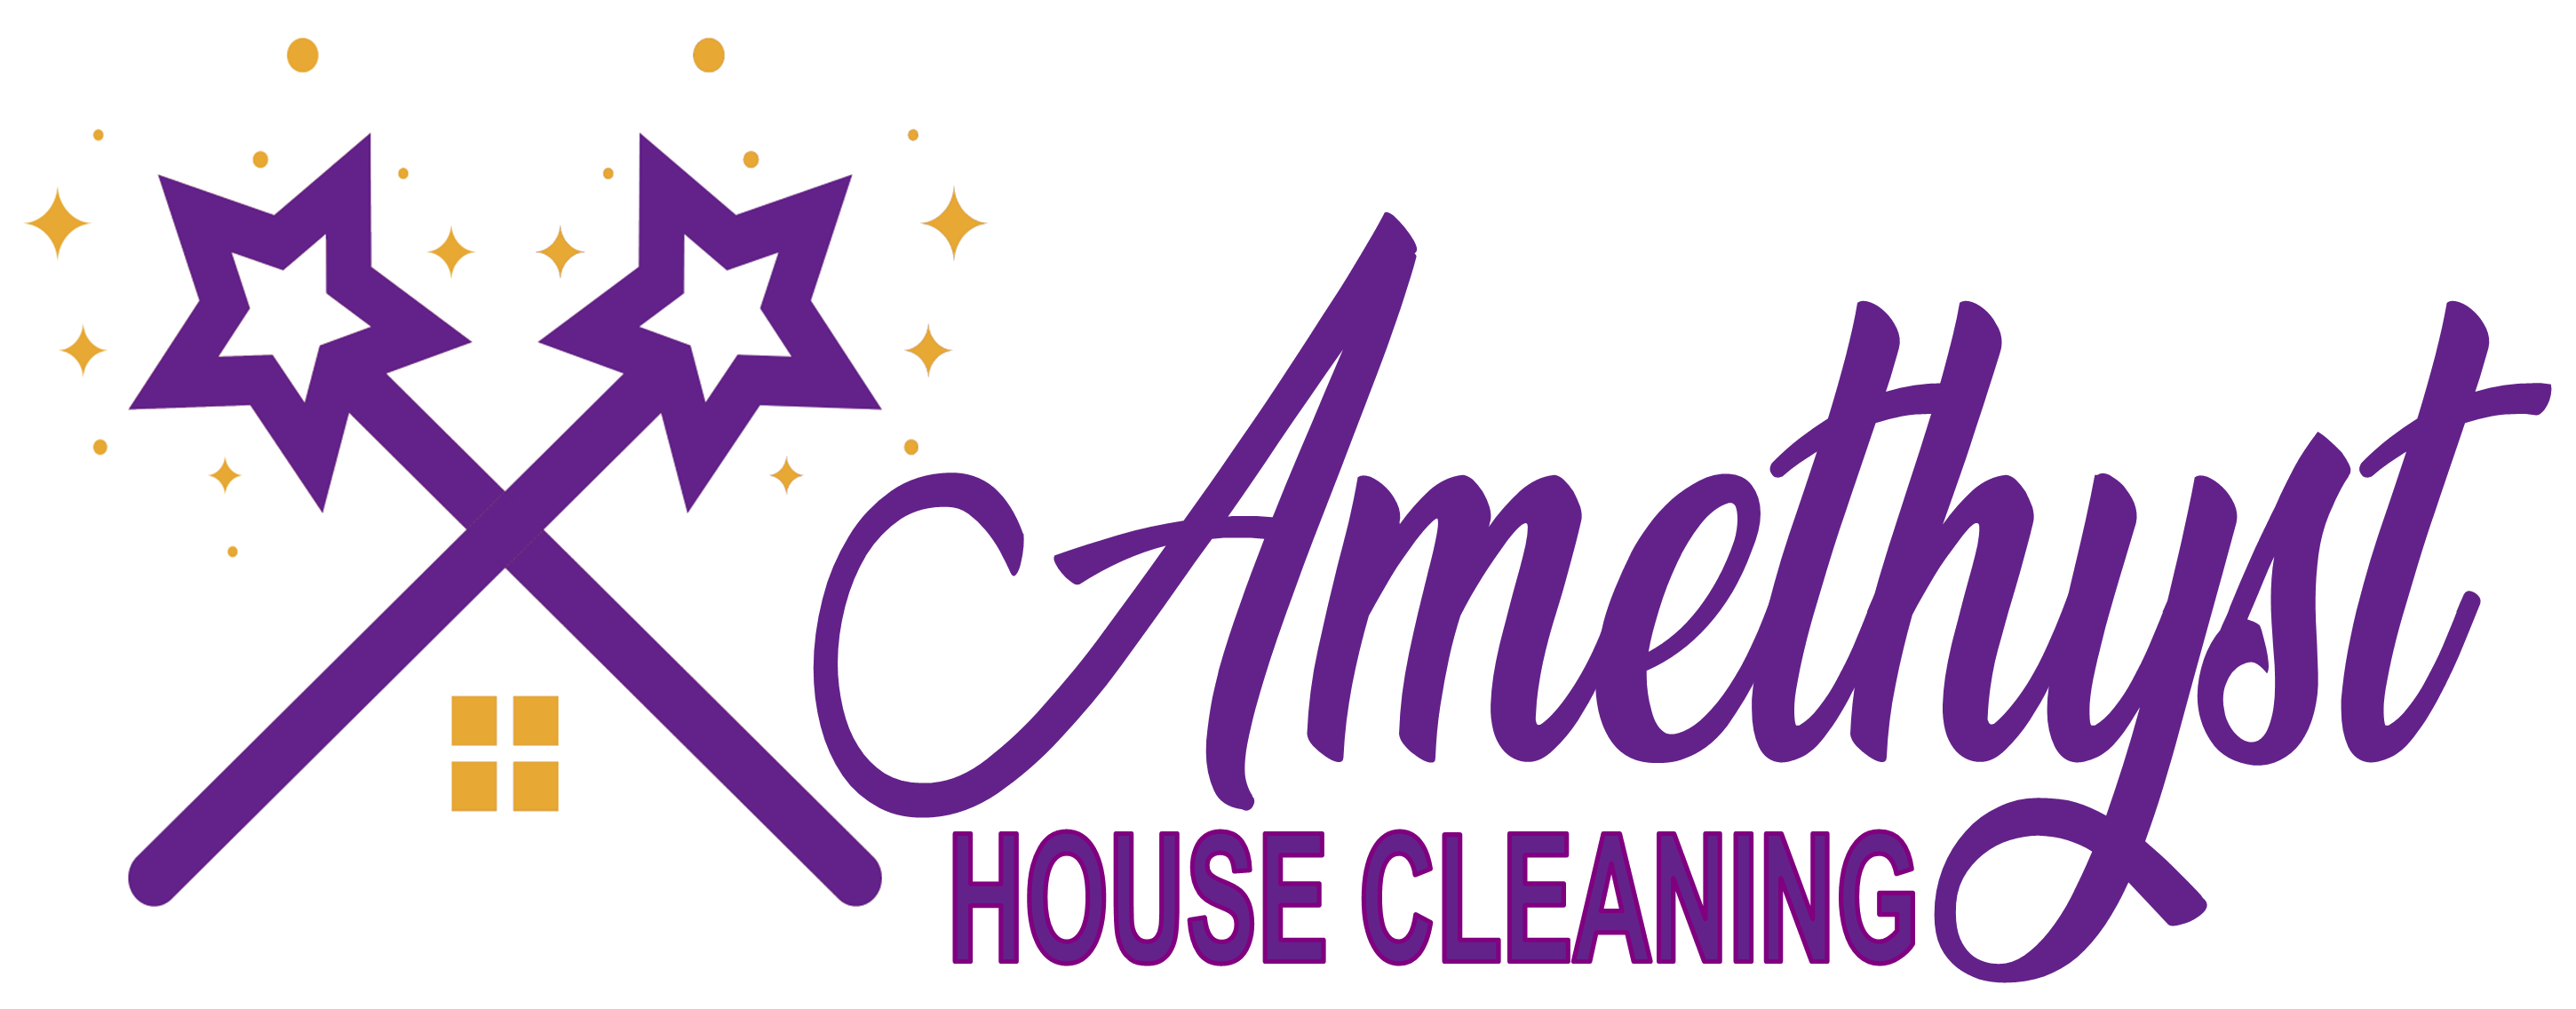 Amethyst House Cleaning Franchise